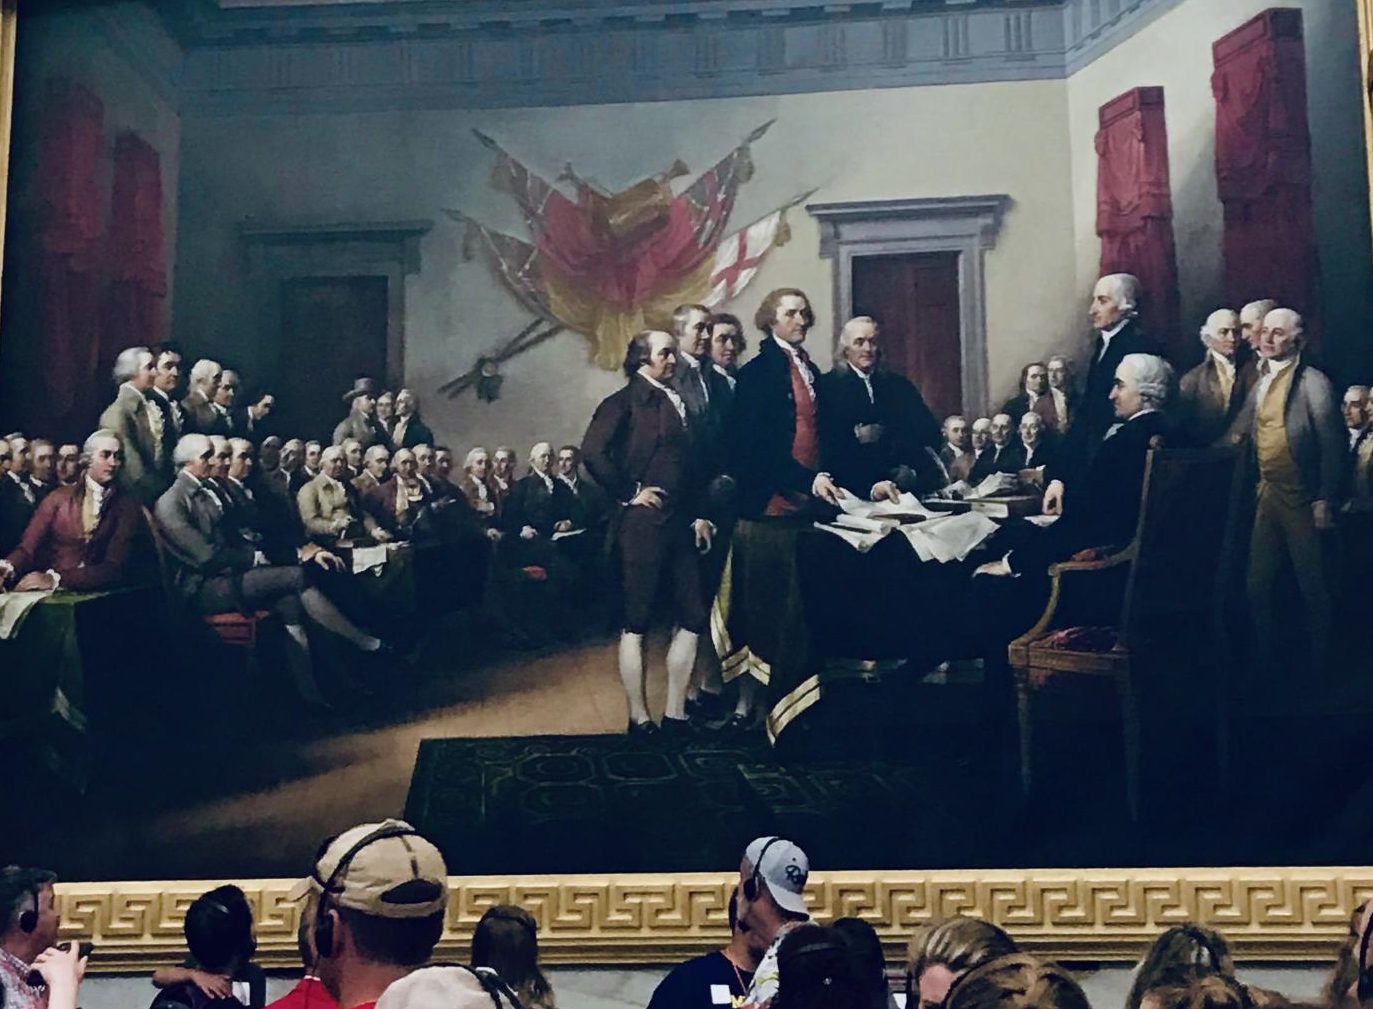 Visitors at the capitol building observe a painting of the Constitutional Convention, where the Founding Fathers used negotiations to form our nation.